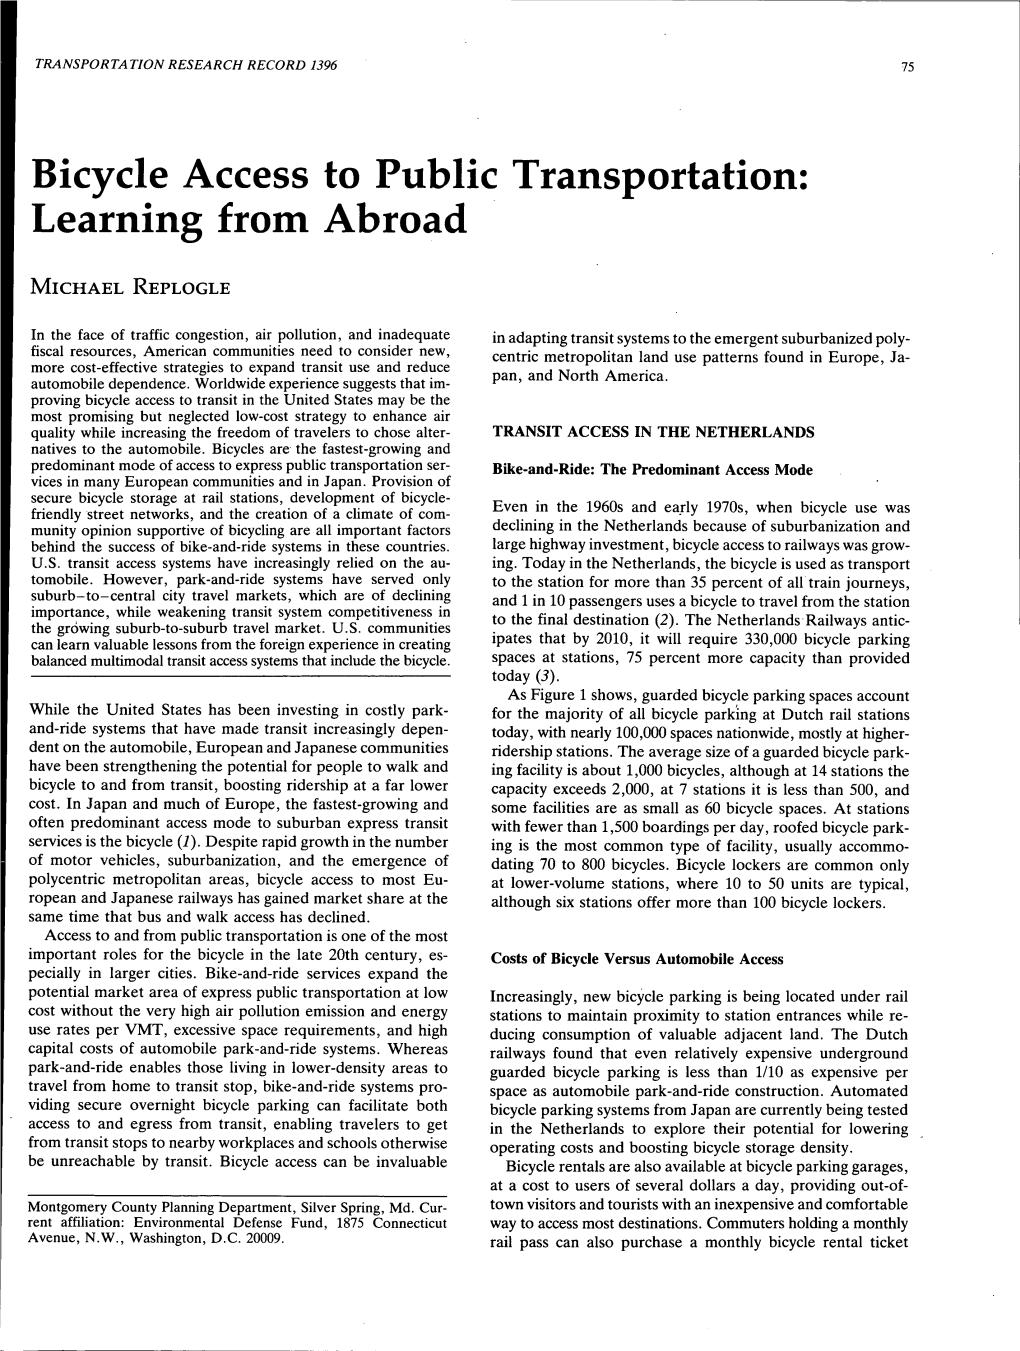 Bicycle Access to Public Transportation: Learning from Abroad